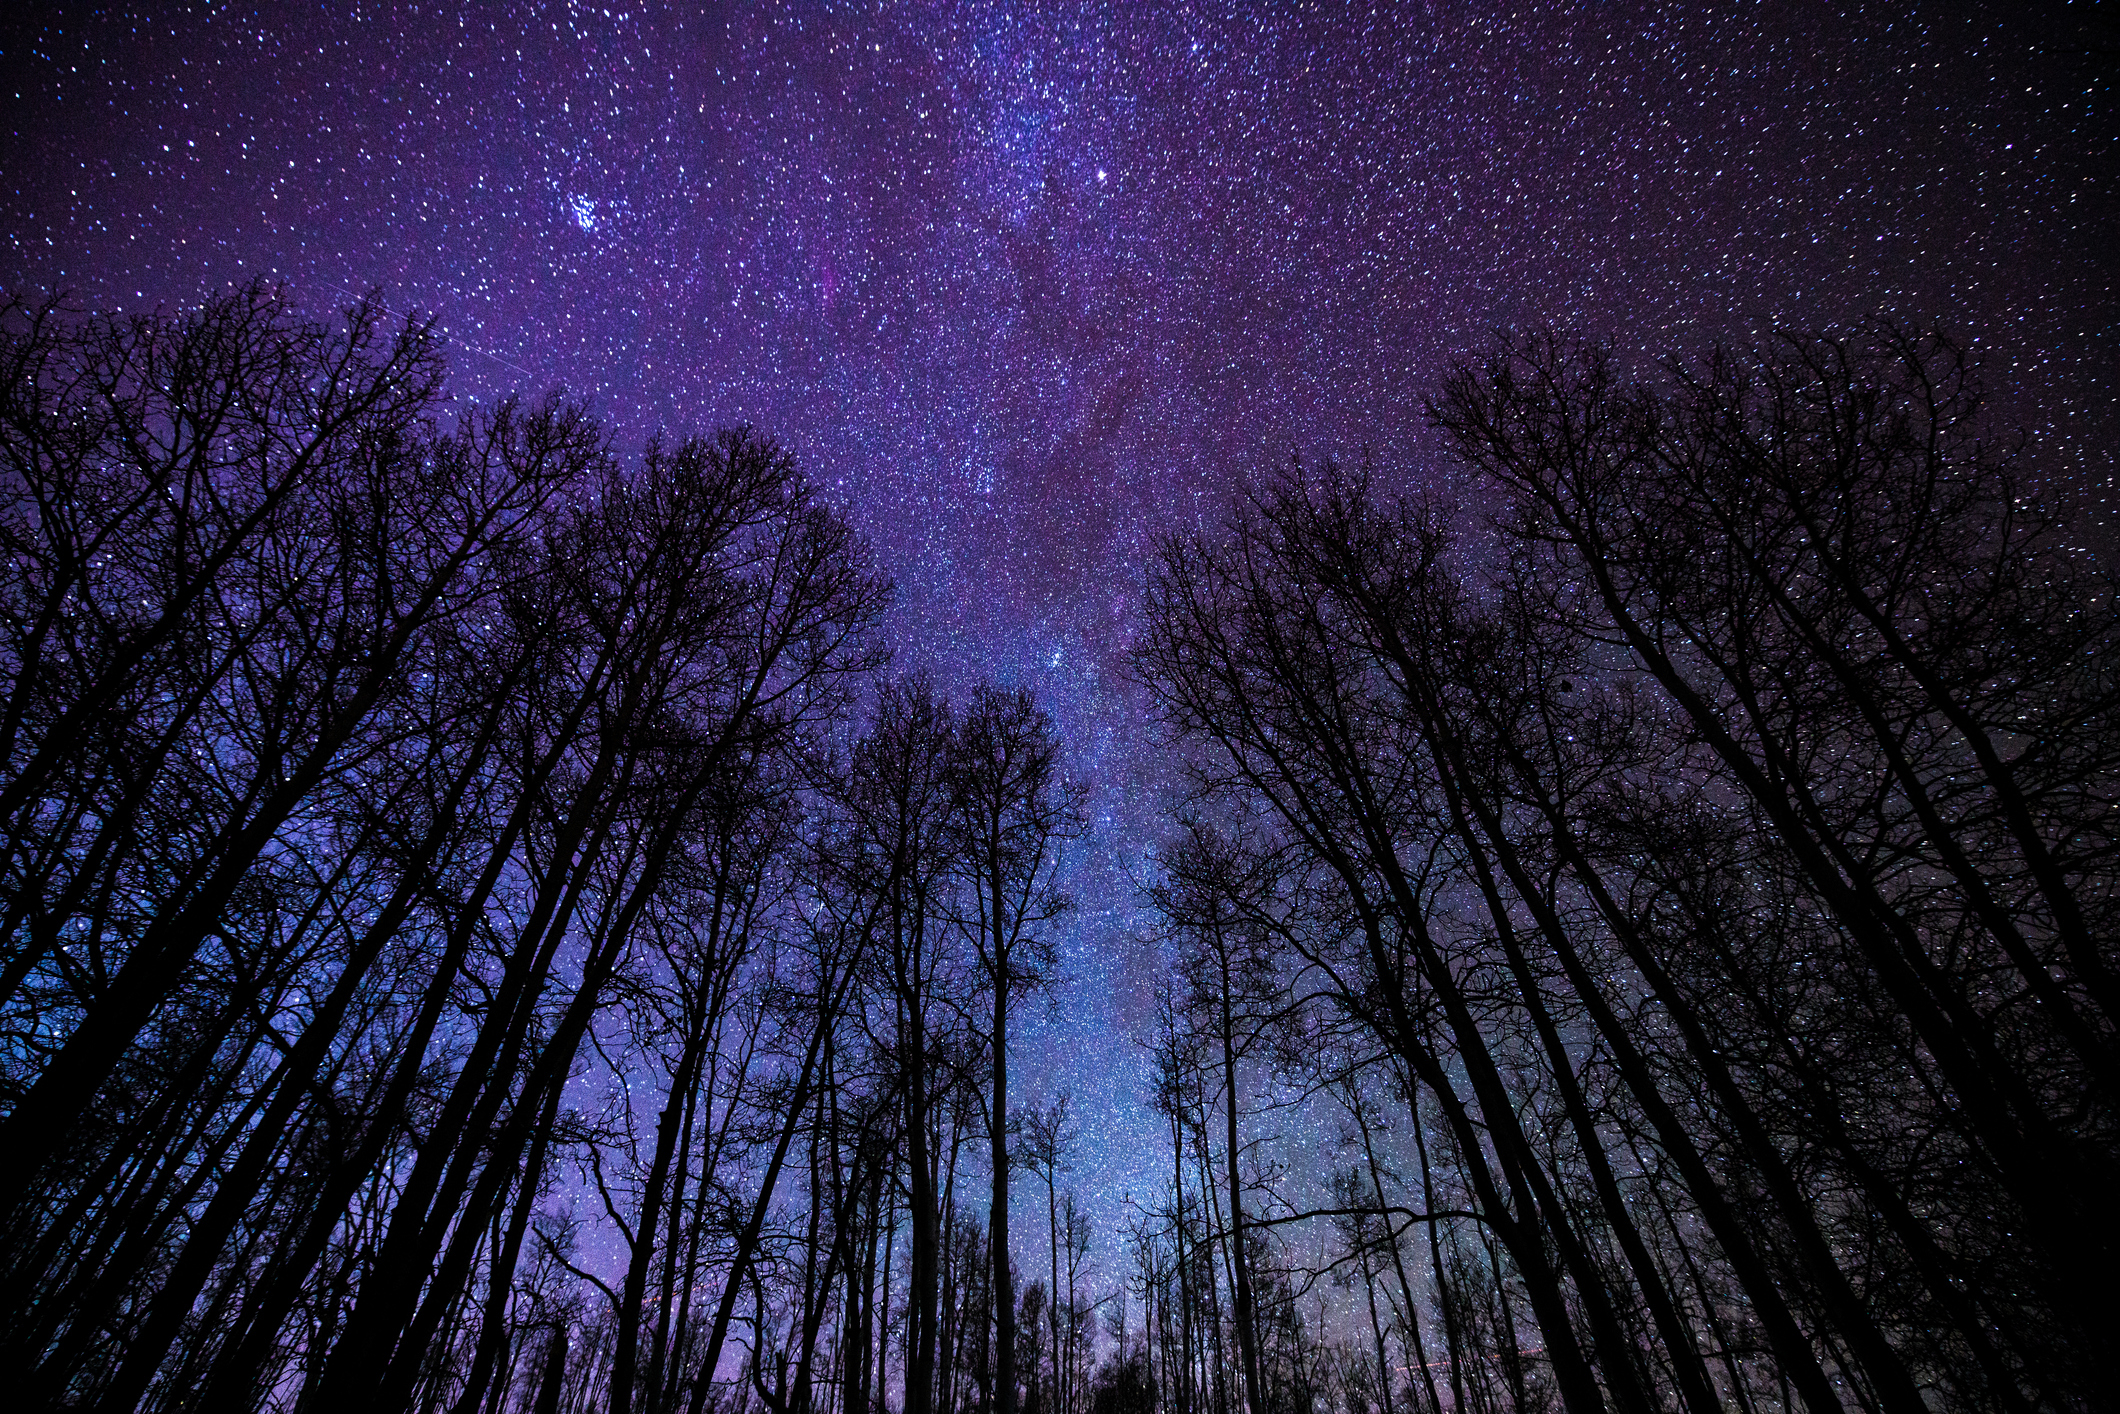 Starry night sky viewed from a forest clearing